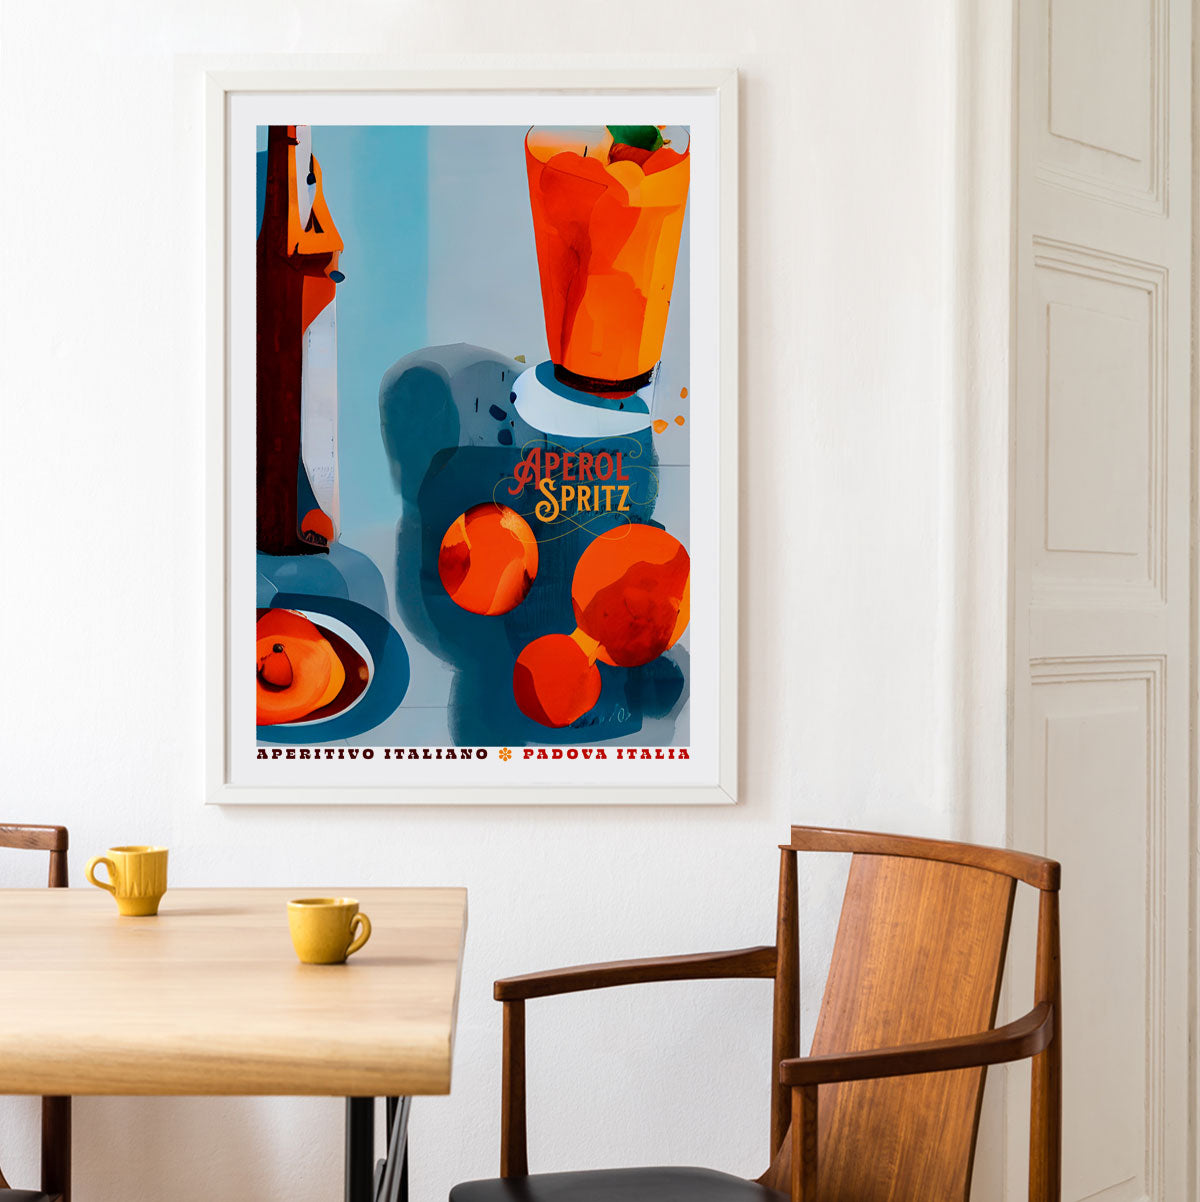 Aperol Spritz Italy retro vintage poster print from Places We Luv